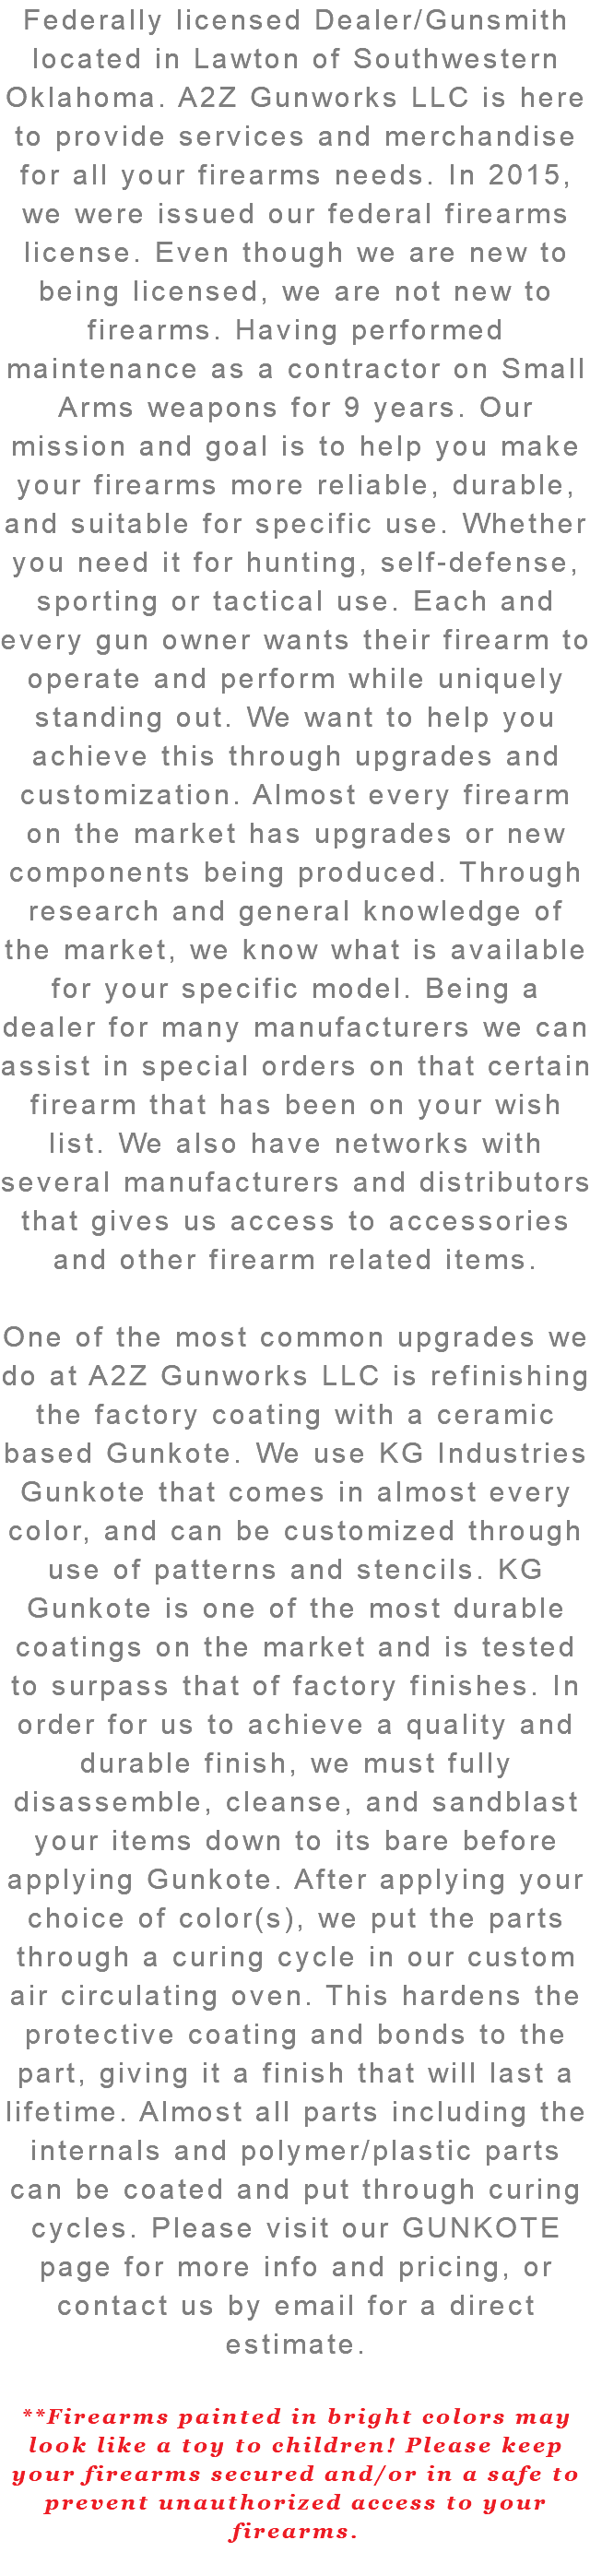 Federally licensed Dealer/Gunsmith located in Lawton of Southwestern Oklahoma. A2Z Gunworks LLC is here to provide services and merchandise for all your firearms needs. In 2015, we were issued our federal firearms license. Even though we are new to being licensed, we are not new to firearms. Having performed maintenance as a contractor on Small Arms weapons for 9 years. Our mission and goal is to help you make your firearms more reliable, durable, and suitable for specific use. Whether you need it for hunting, self-defense, sporting or tactical use. Each and every gun owner wants their firearm to operate and perform while uniquely standing out. We want to help you achieve this through upgrades and customization. Almost every firearm on the market has upgrades or new components being produced. Through research and general knowledge of the market, we know what is available for your specific model. Being a dealer for many manufacturers we can assist in special orders on that certain firearm that has been on your wish list. We also have networks with several manufacturers and distributors that gives us access to accessories and other firearm related items. One of the most common upgrades we do at A2Z Gunworks LLC is refinishing the factory coating with a ceramic based Gunkote. We use KG Industries Gunkote that comes in almost every color, and can be customized through use of patterns and stencils. KG Gunkote is one of the most durable coatings on the market and is tested to surpass that of factory finishes. In order for us to achieve a quality and durable finish, we must fully disassemble, cleanse, and sandblast your items down to its bare before applying Gunkote. After applying your choice of color(s), we put the parts through a curing cycle in our custom air circulating oven. This hardens the protective coating and bonds to the part, giving it a finish that will last a lifetime. Almost all parts including the internals and polymer/plastic parts can be coated and put through curing cycles. Please visit our GUNKOTE page for more info and pricing, or contact us by email for a direct estimate. **Firearms painted in bright colors may look like a toy to children! Please keep your firearms secured and/or in a safe to prevent unauthorized access to your firearms. 